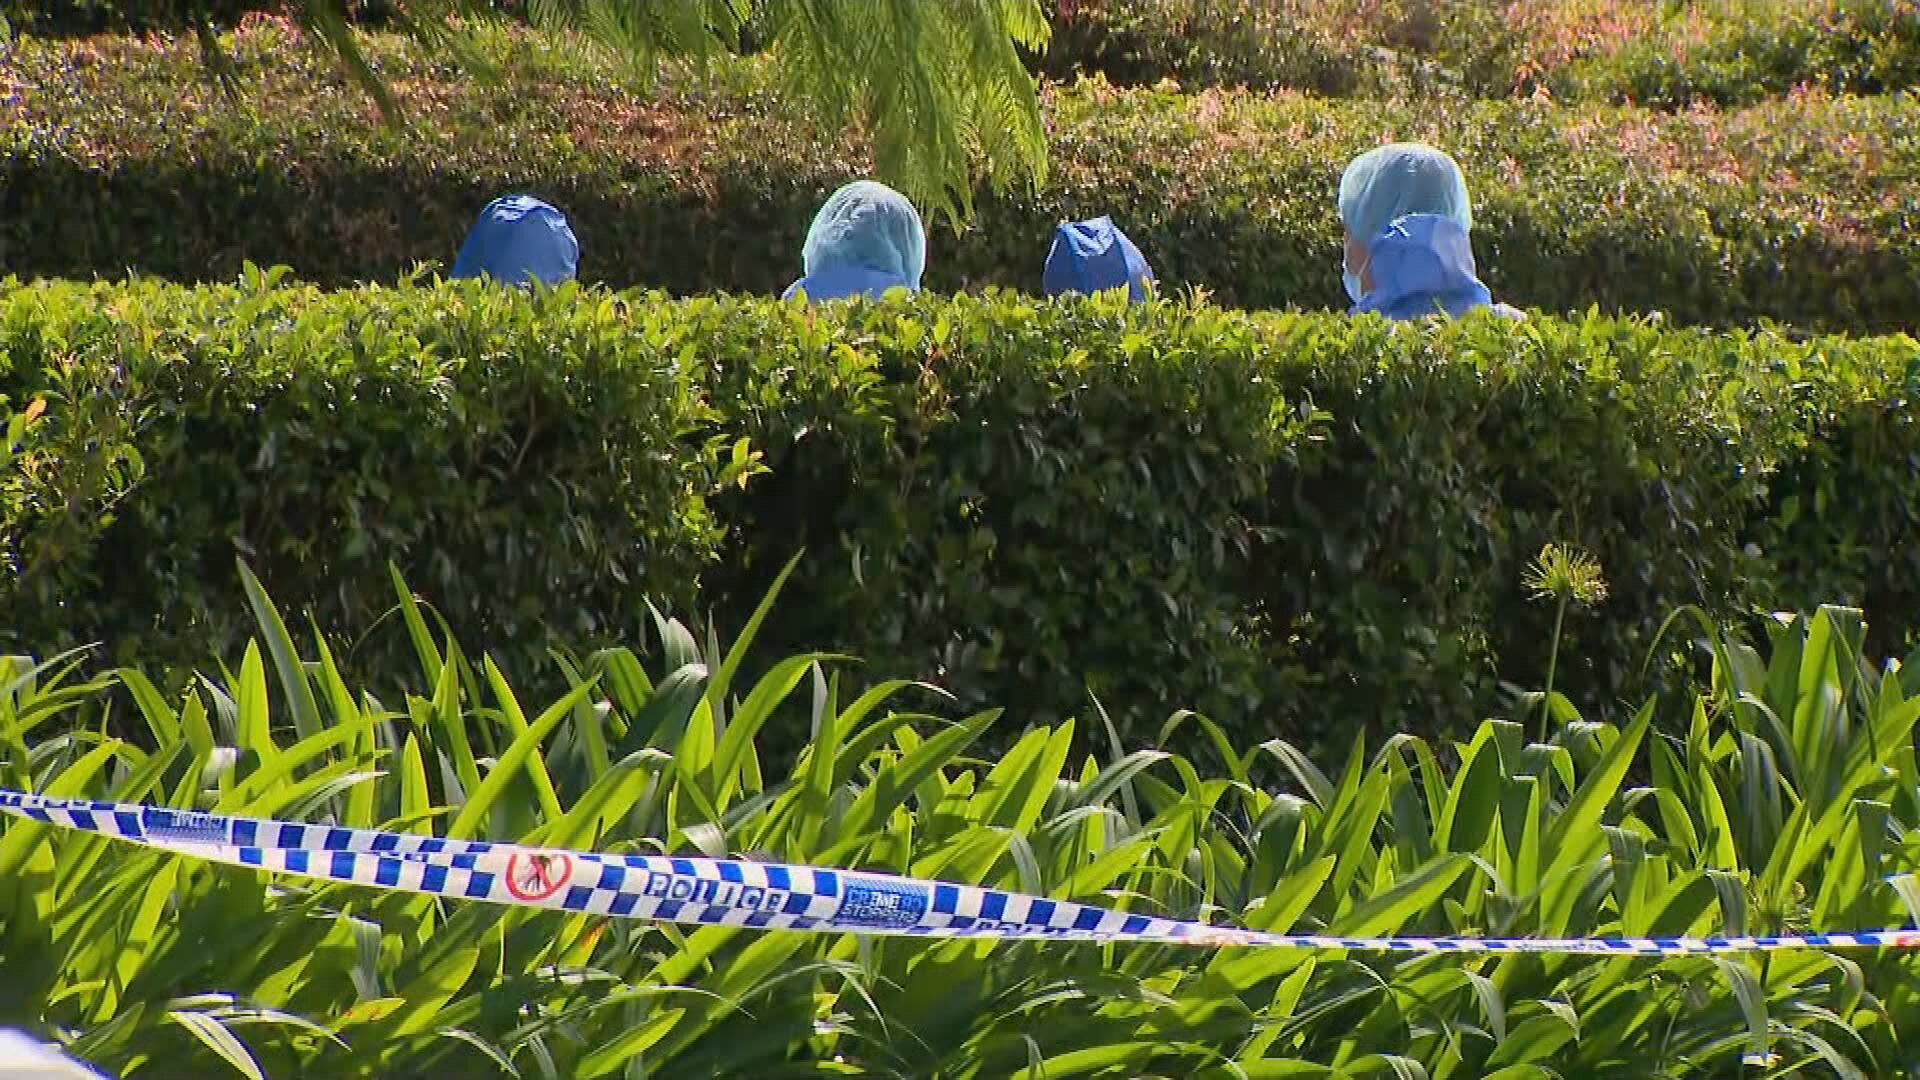 ﻿Detectives and forensic teams are combing two properties, which are central to the investigation at this stage. Burpengary East